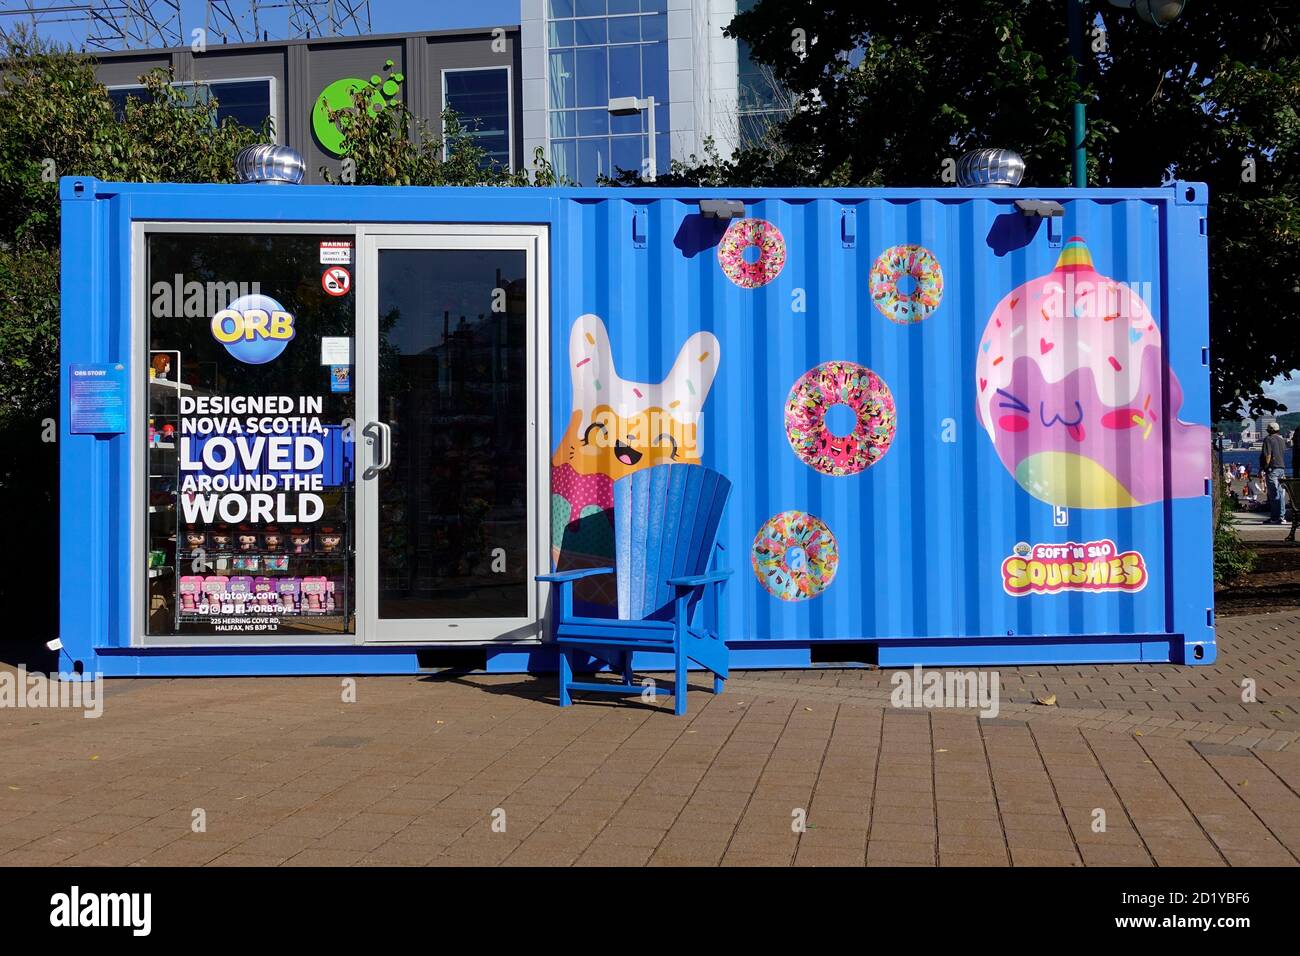 A Toy Shop Made From A Shipping Container At Halifax Cruise Ship Terminal  Nova Scotia Canada, Selling Soft Orb Toys And Souvenirs Stock Photo - Alamy